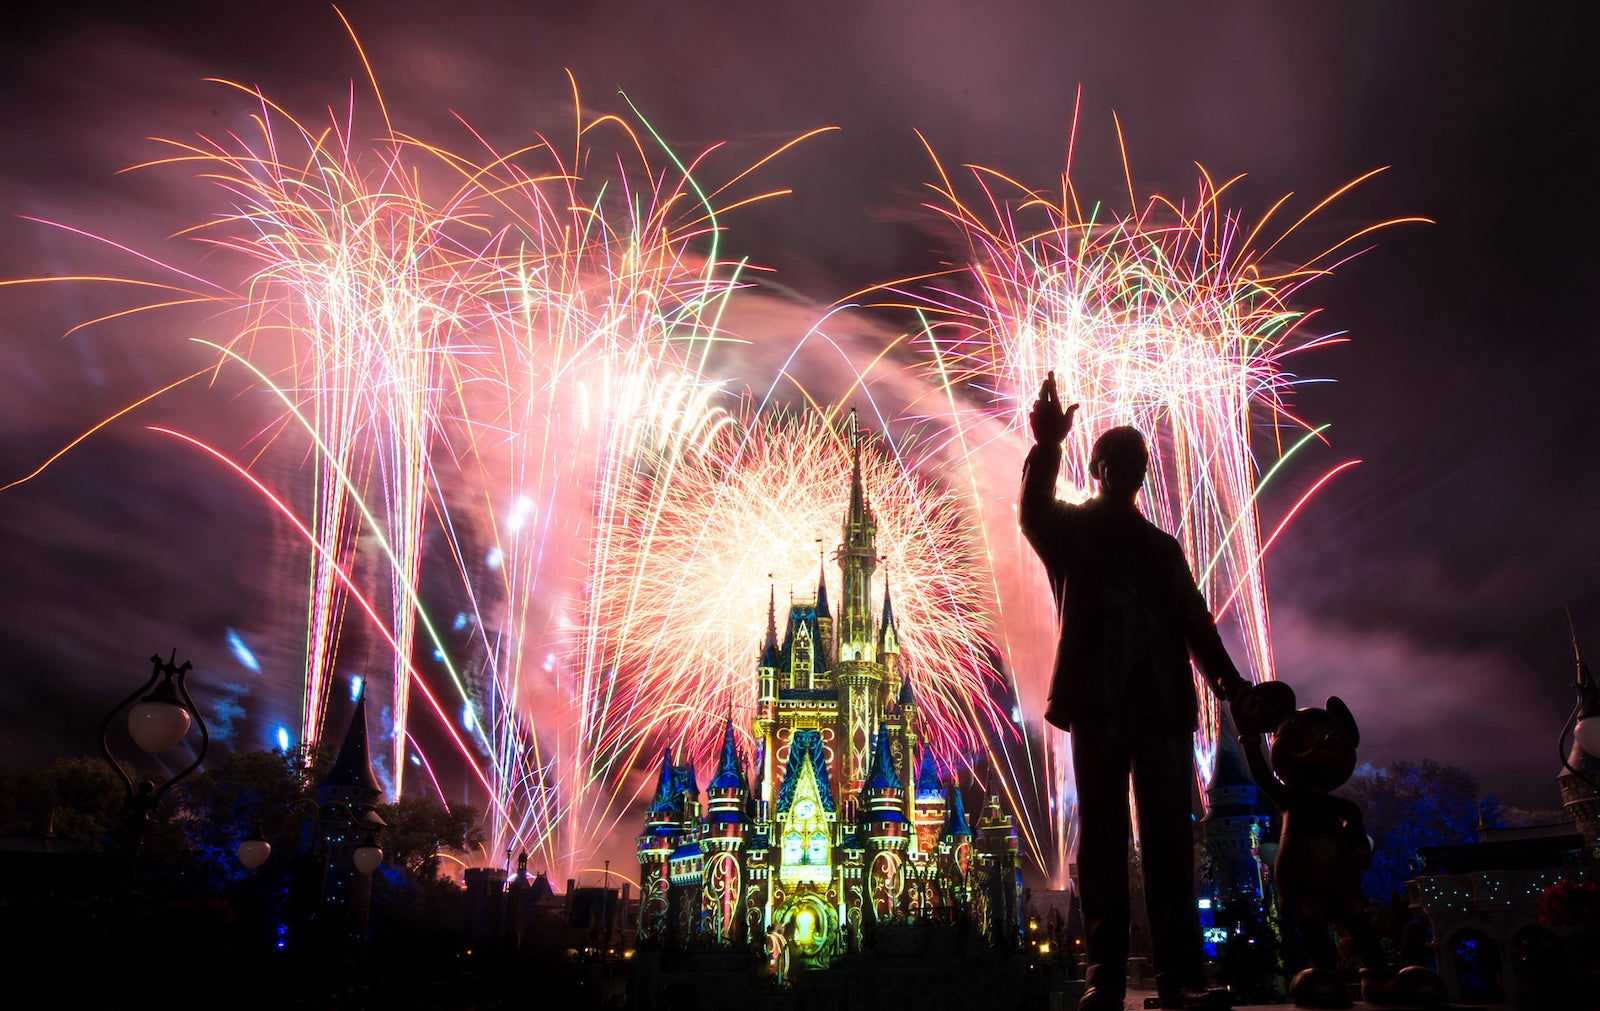 Fireworks at the Disney Palace